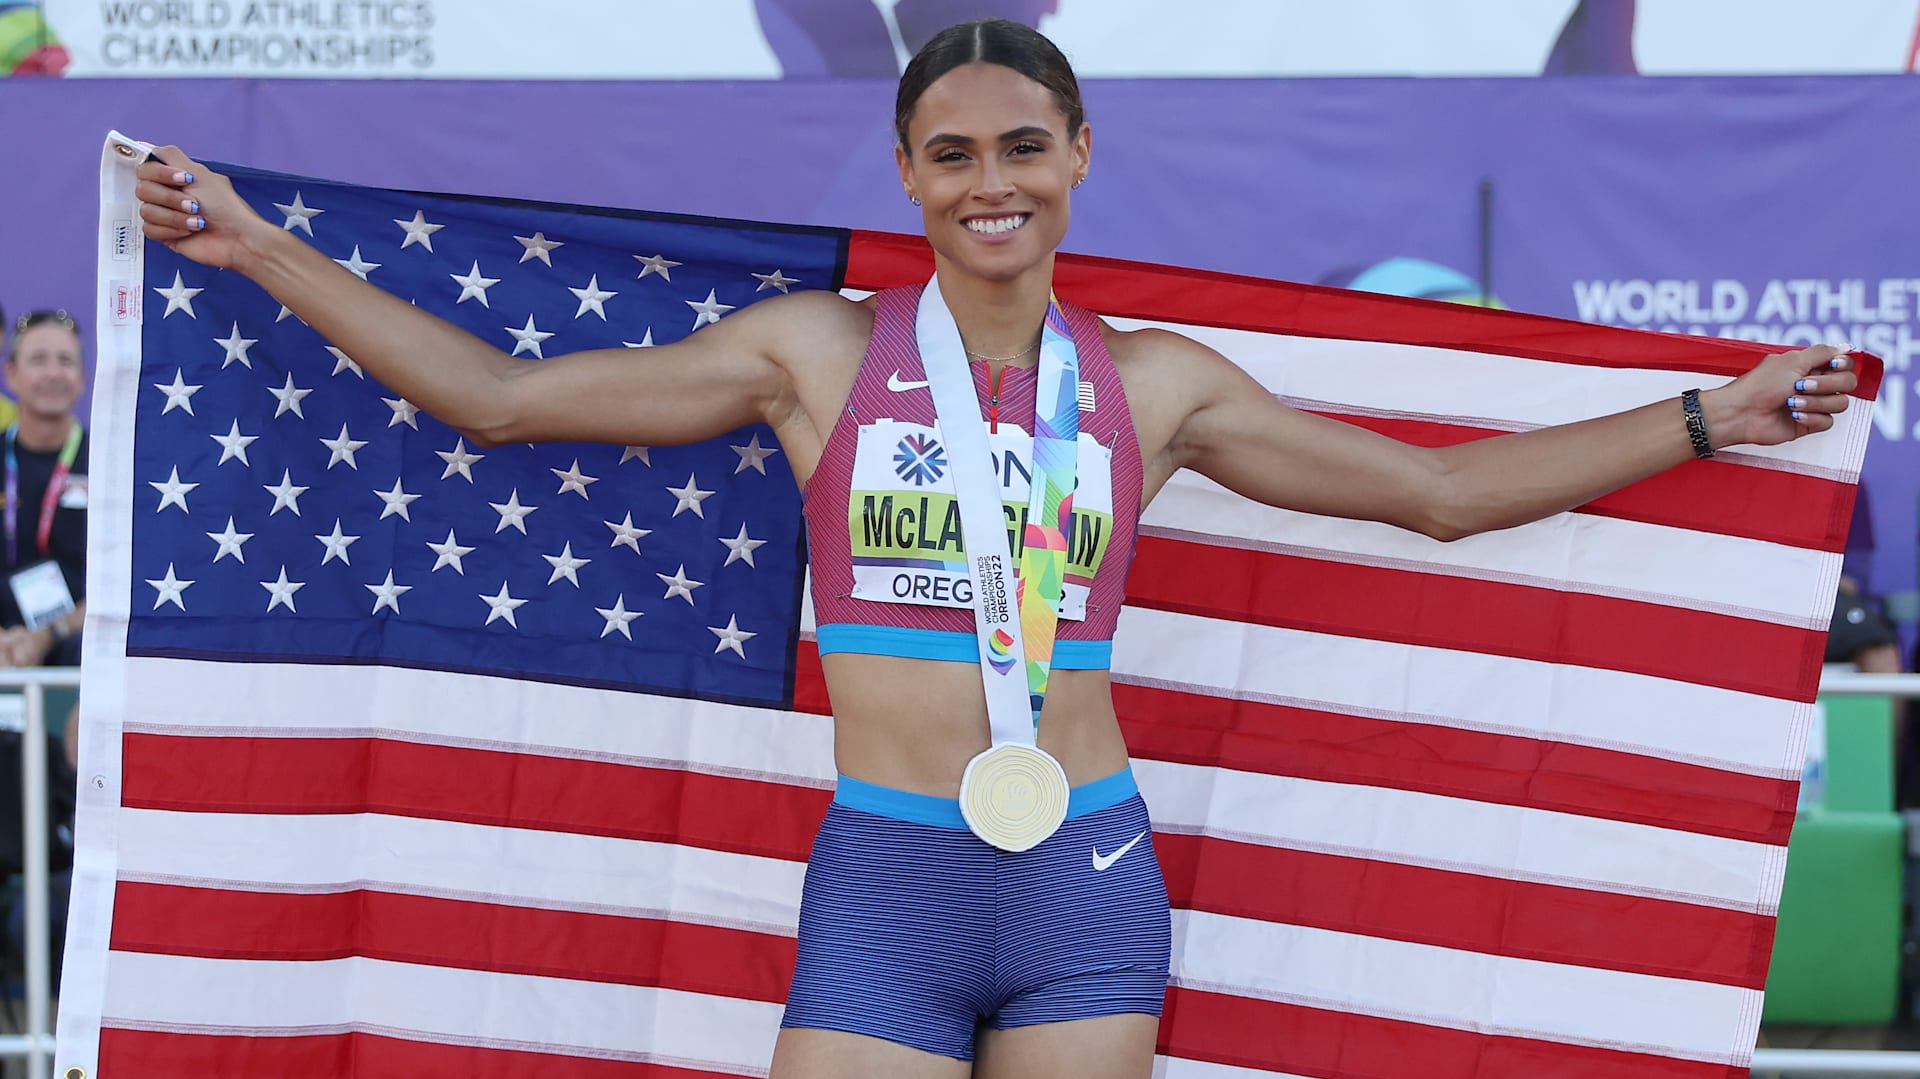 World track and field championships 2022 13 of the best moments from Oregon